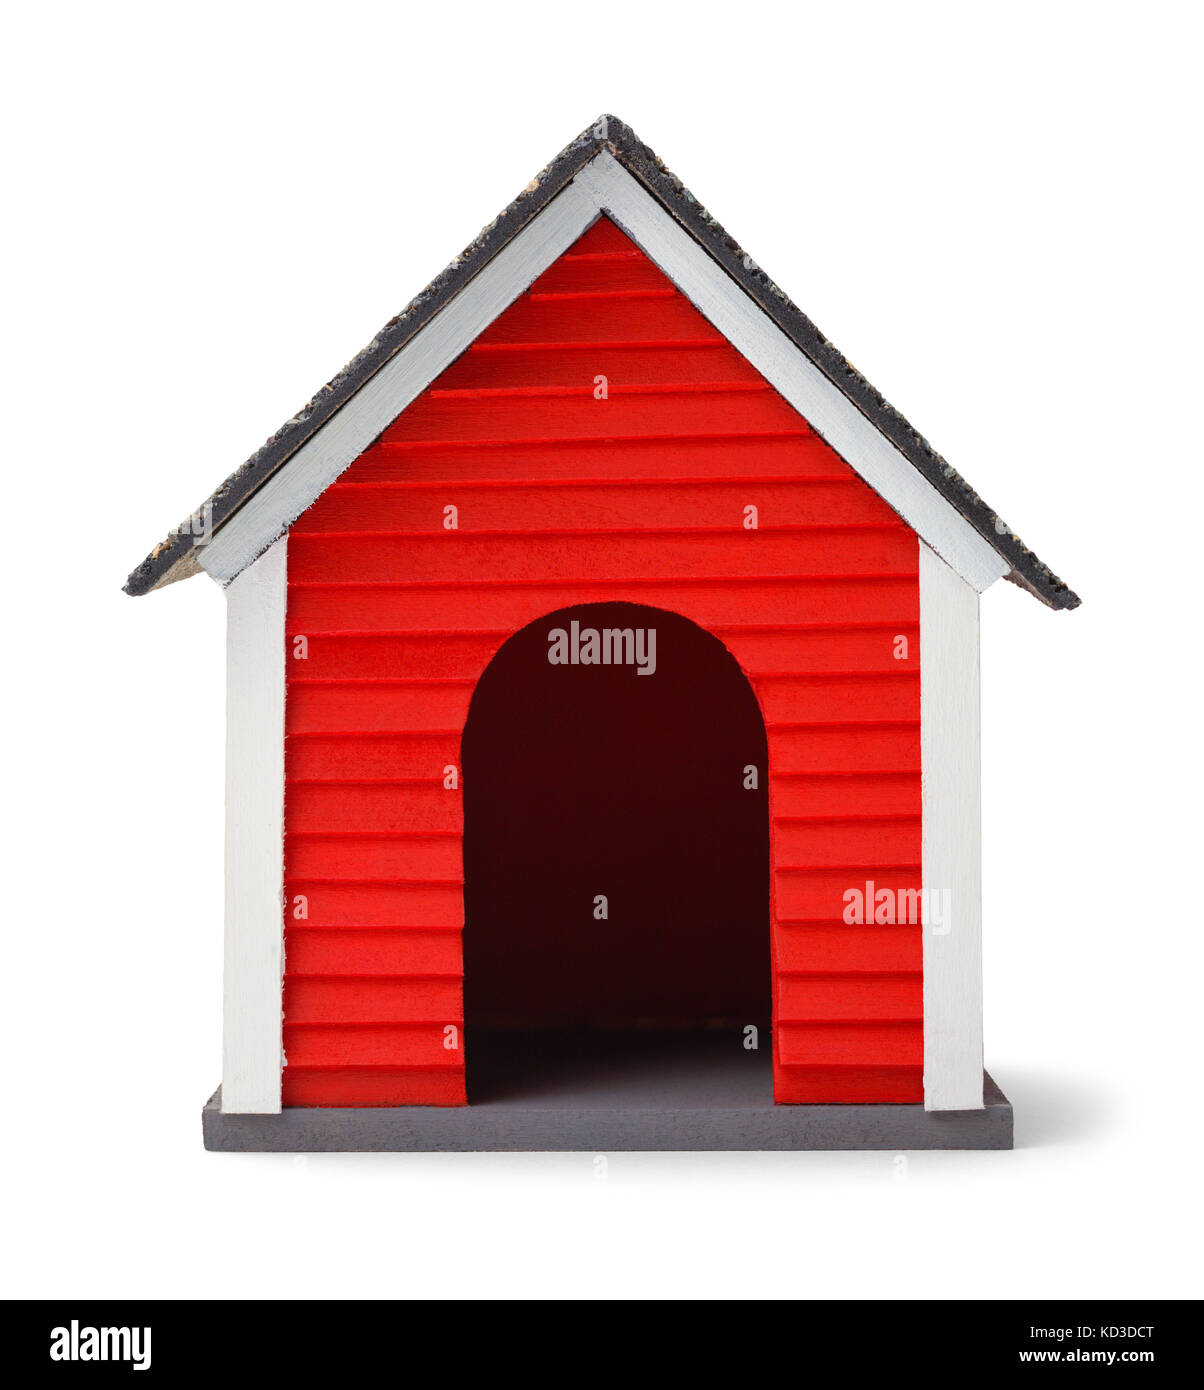 Red Dog House Front Isolated on White Background. Stock Photo